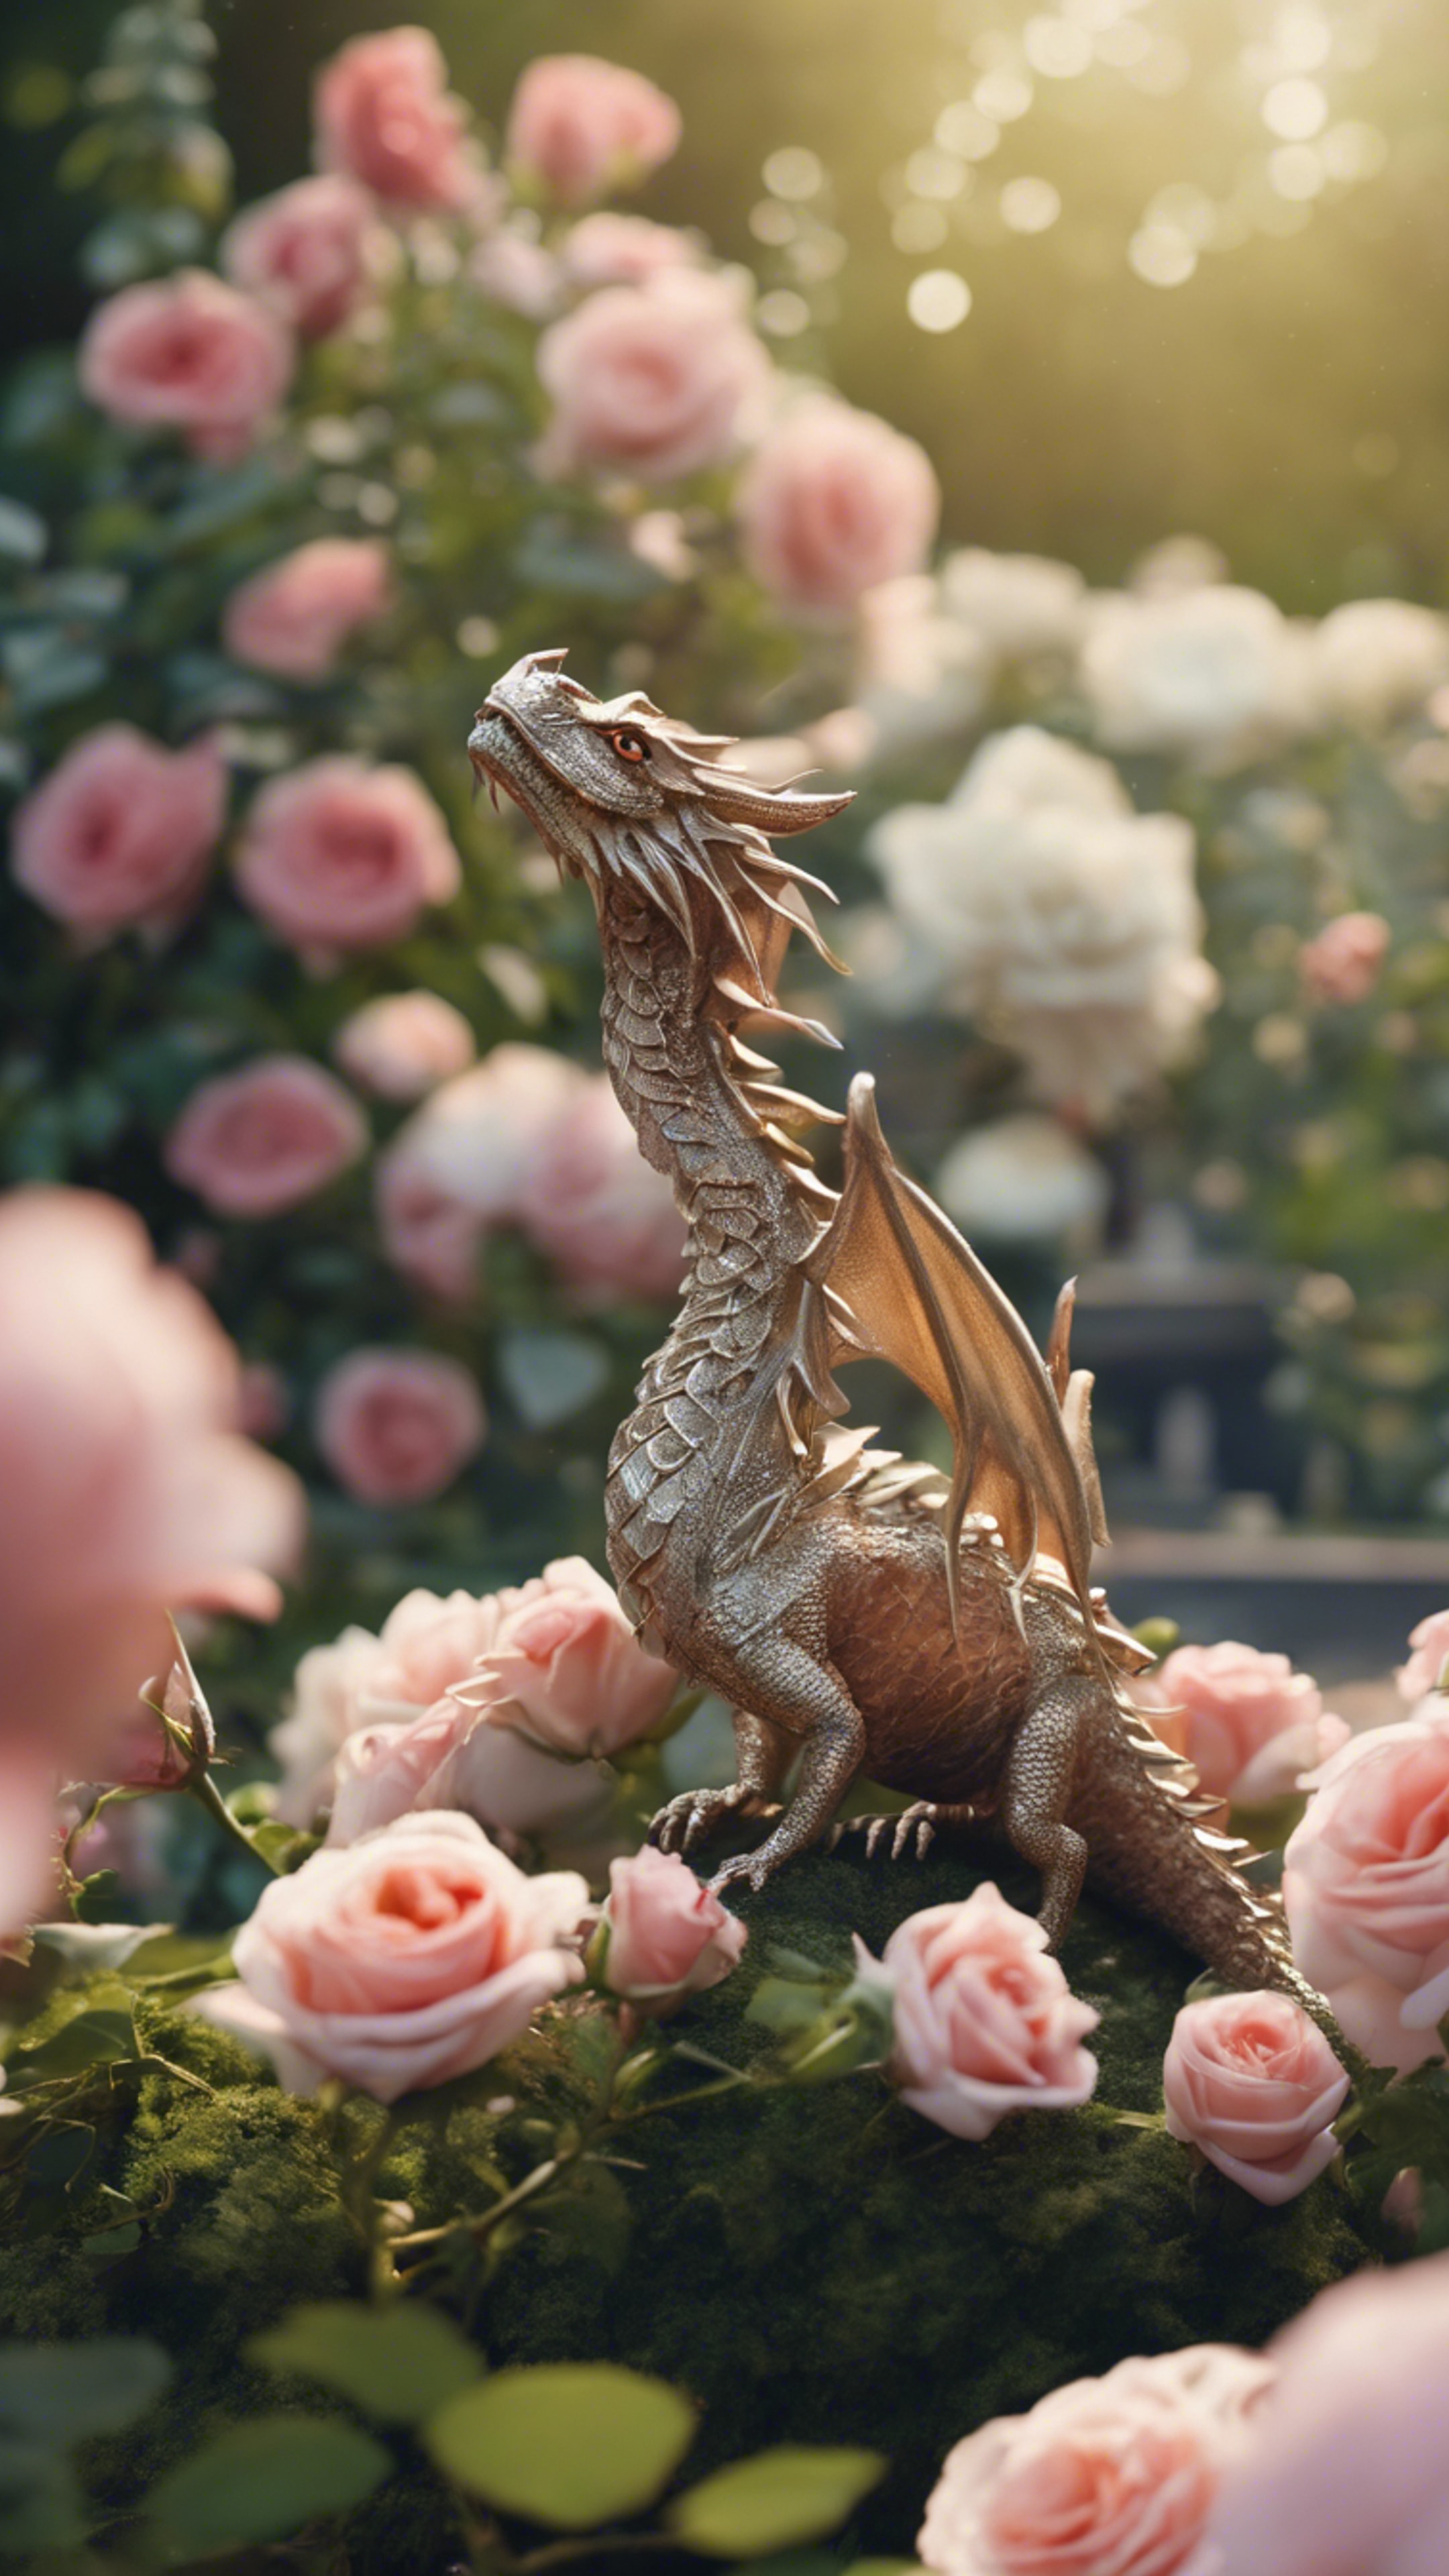 A peaceful garden scene with a tiny, delicate dragon hovering over blooming roses. Kertas dinding[938d180fa7284dedb4af]